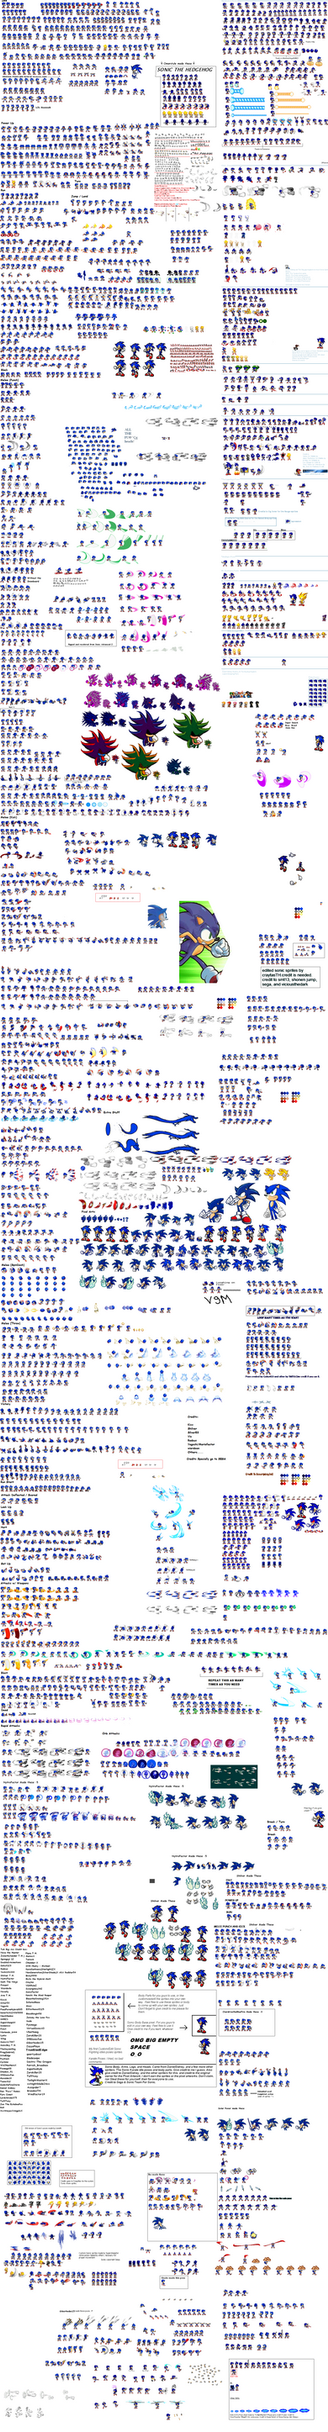 Sonic Ultimate Sheet 2 By Acespider7 On Deviantart